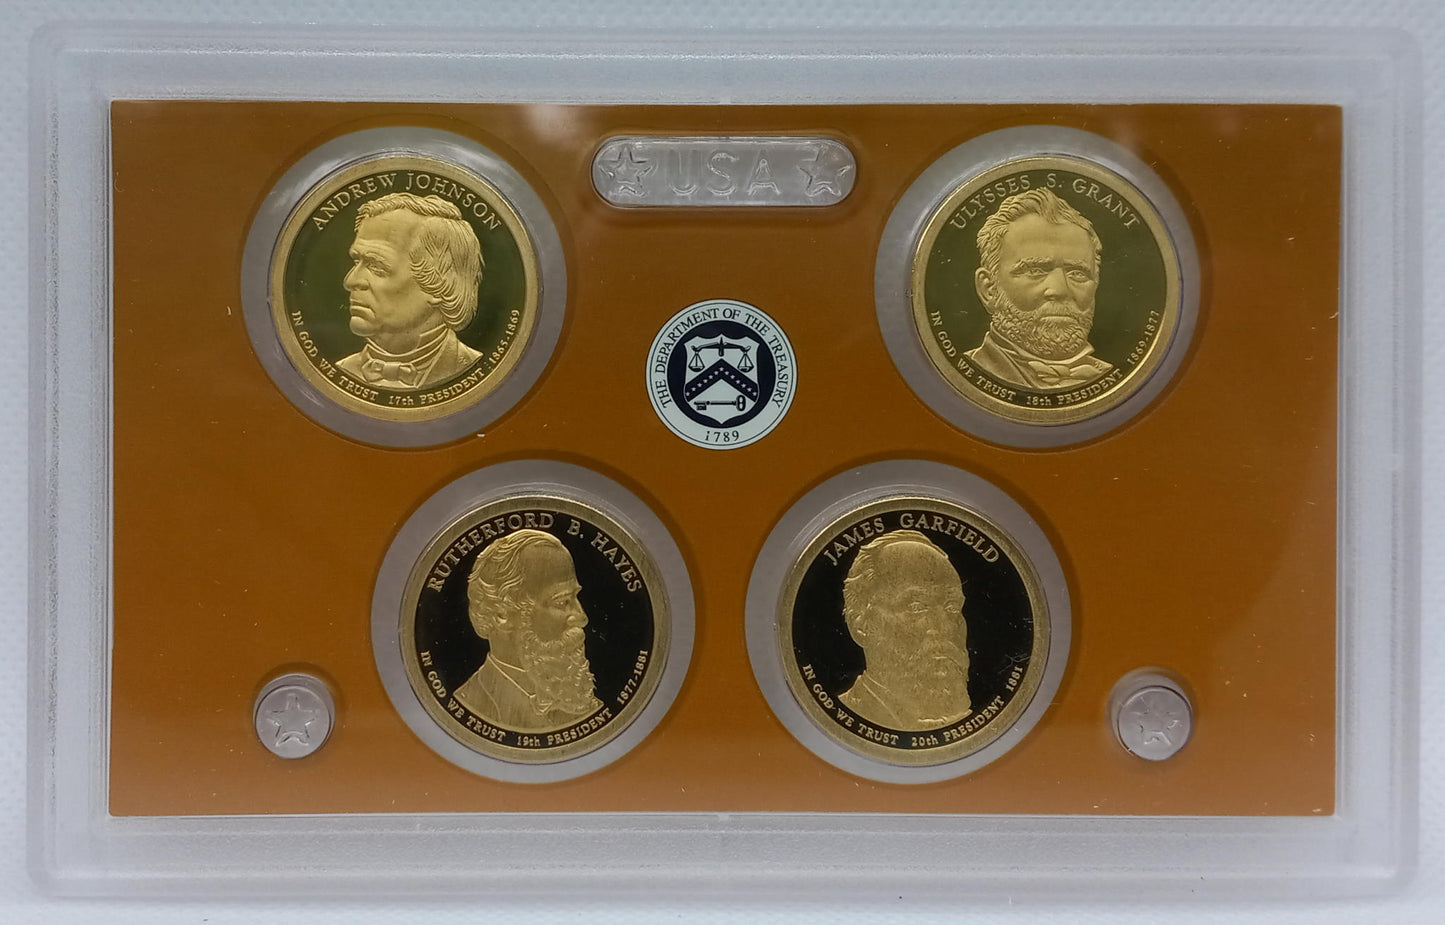 2011 United States Mint PRESIDENTIAL DOLLAR COIN PROOF SET With OGP & COA!